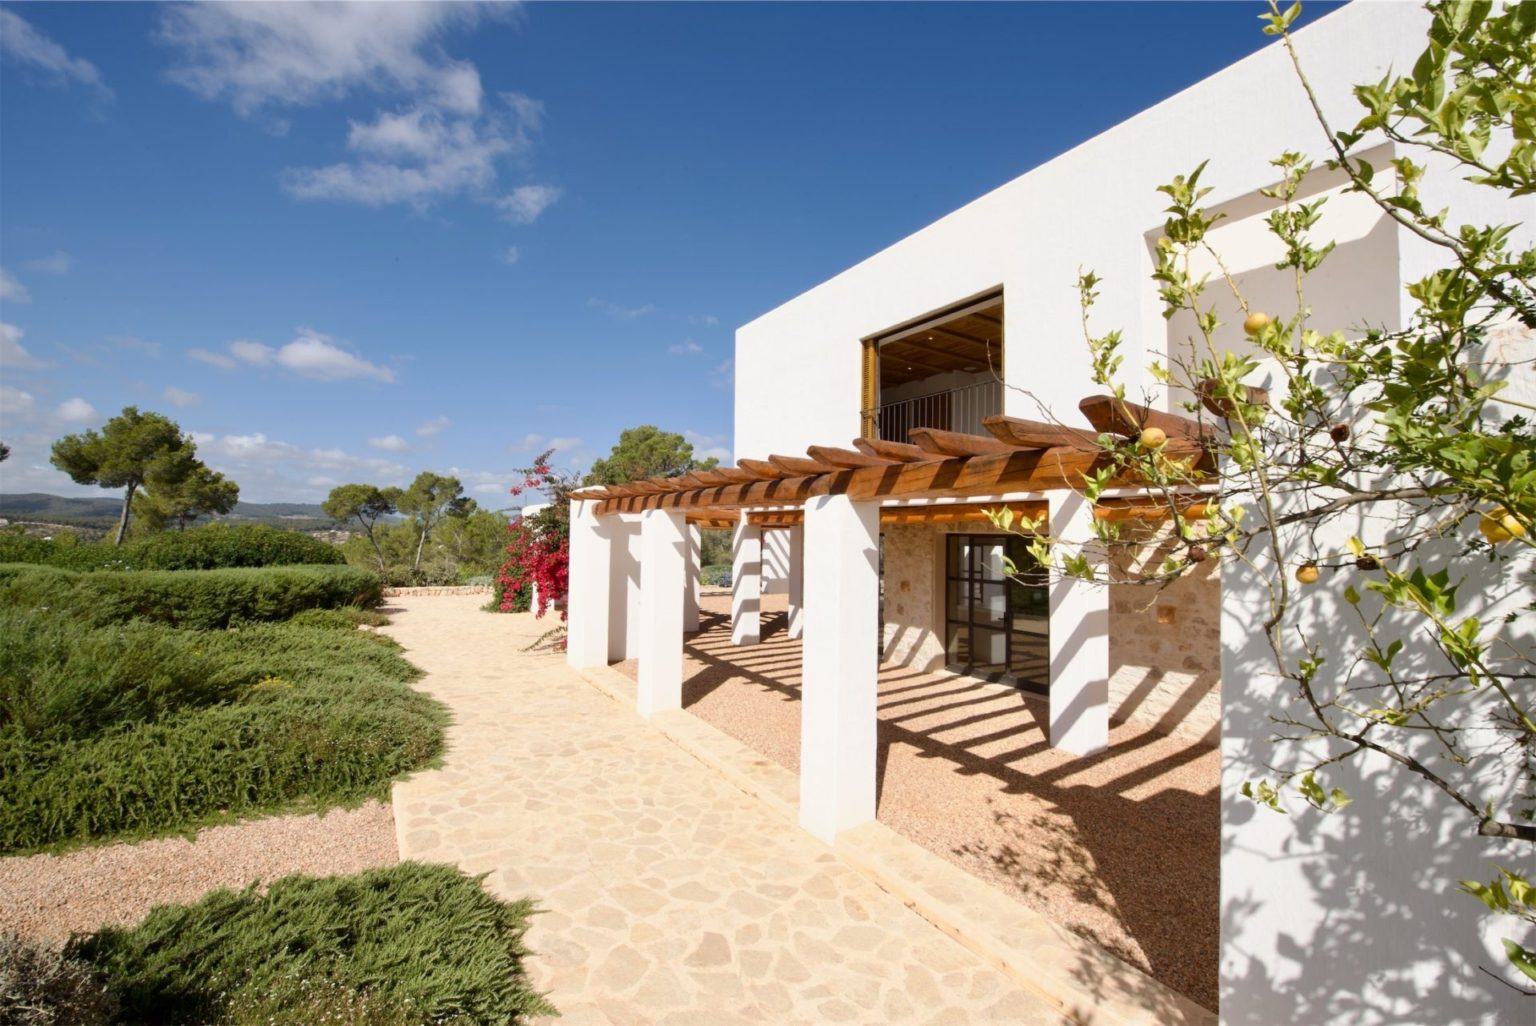 Completely renovated historic finca by Blakstad